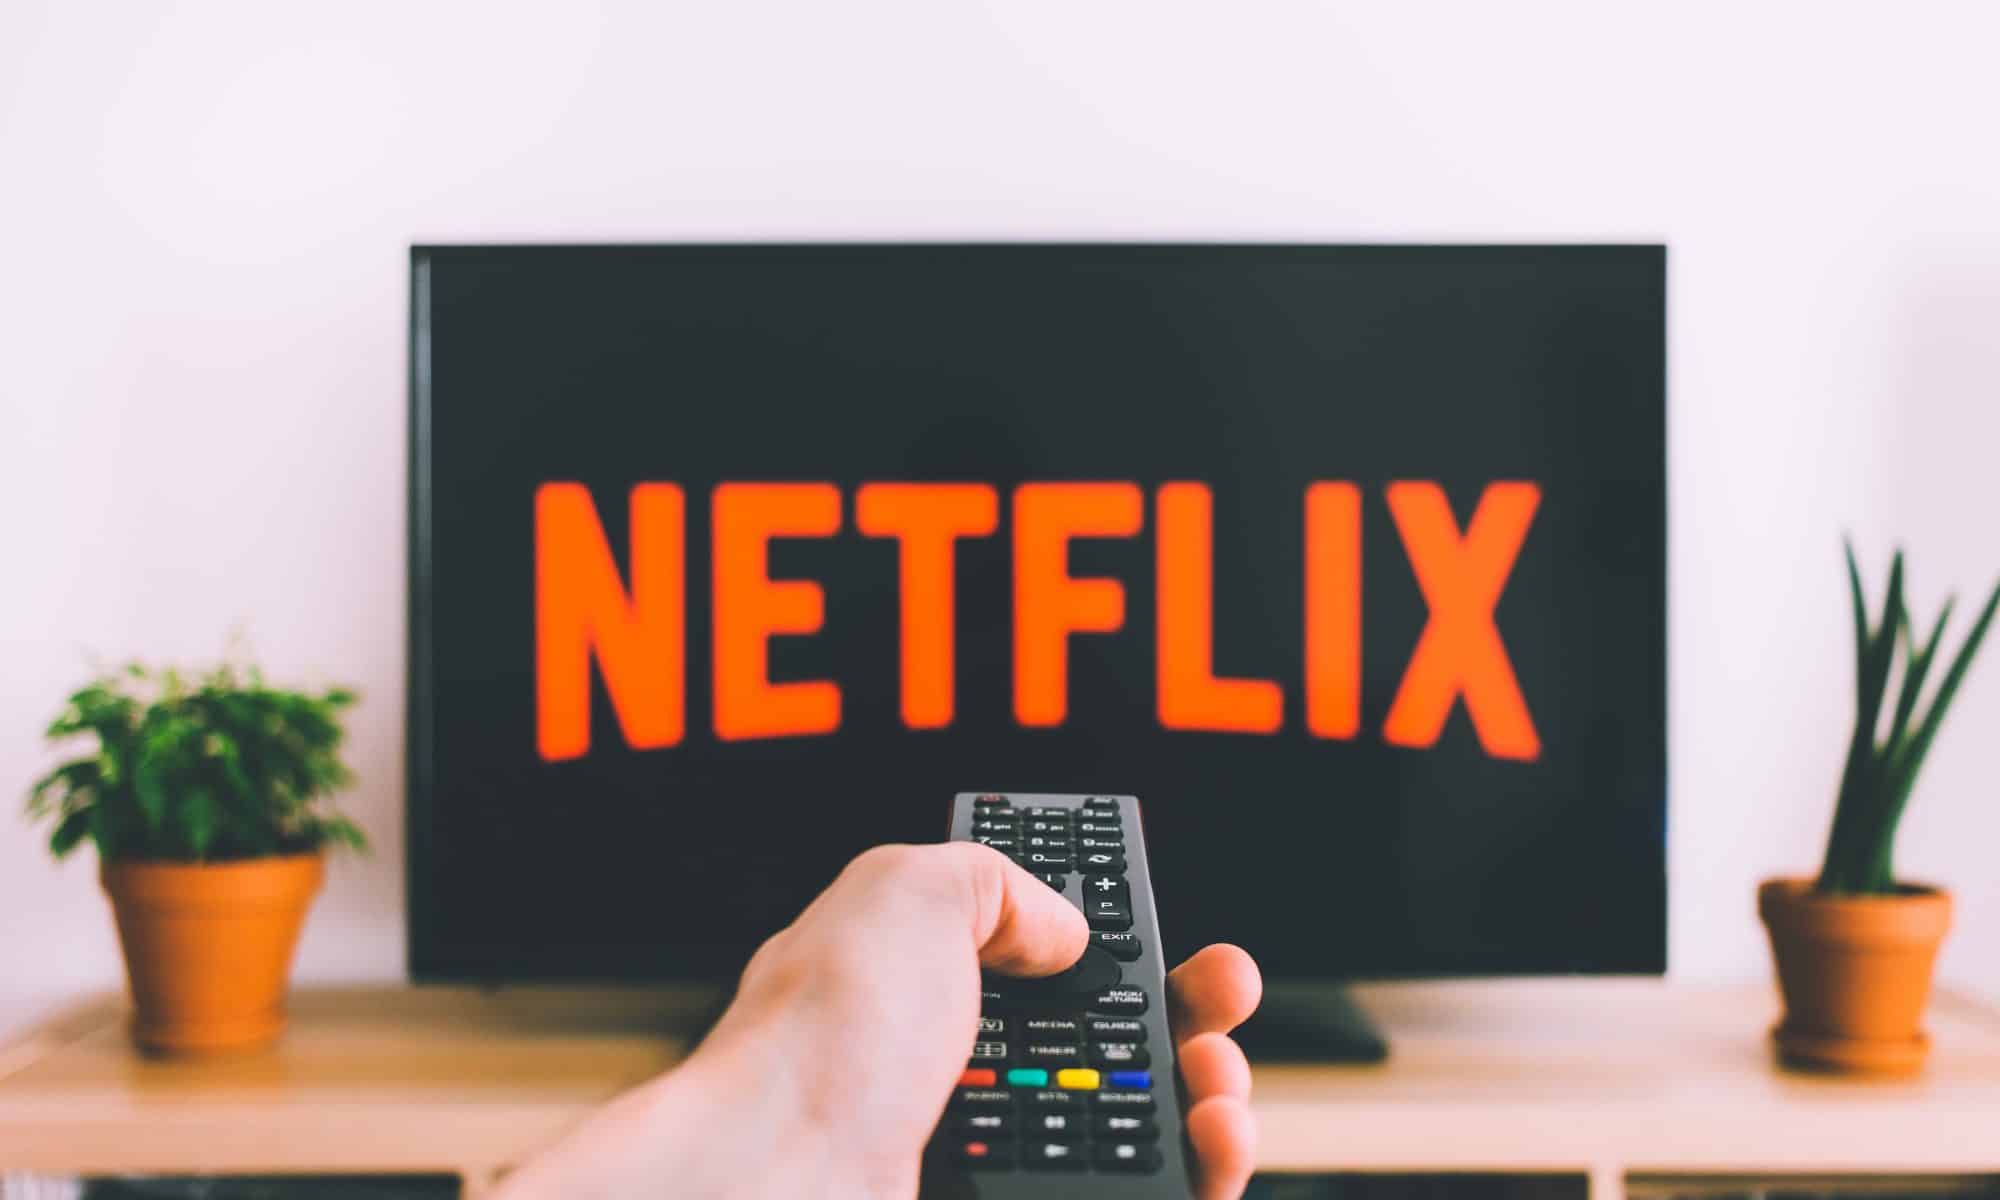 A person pointing a remote control towards the TV that says Netflix on it